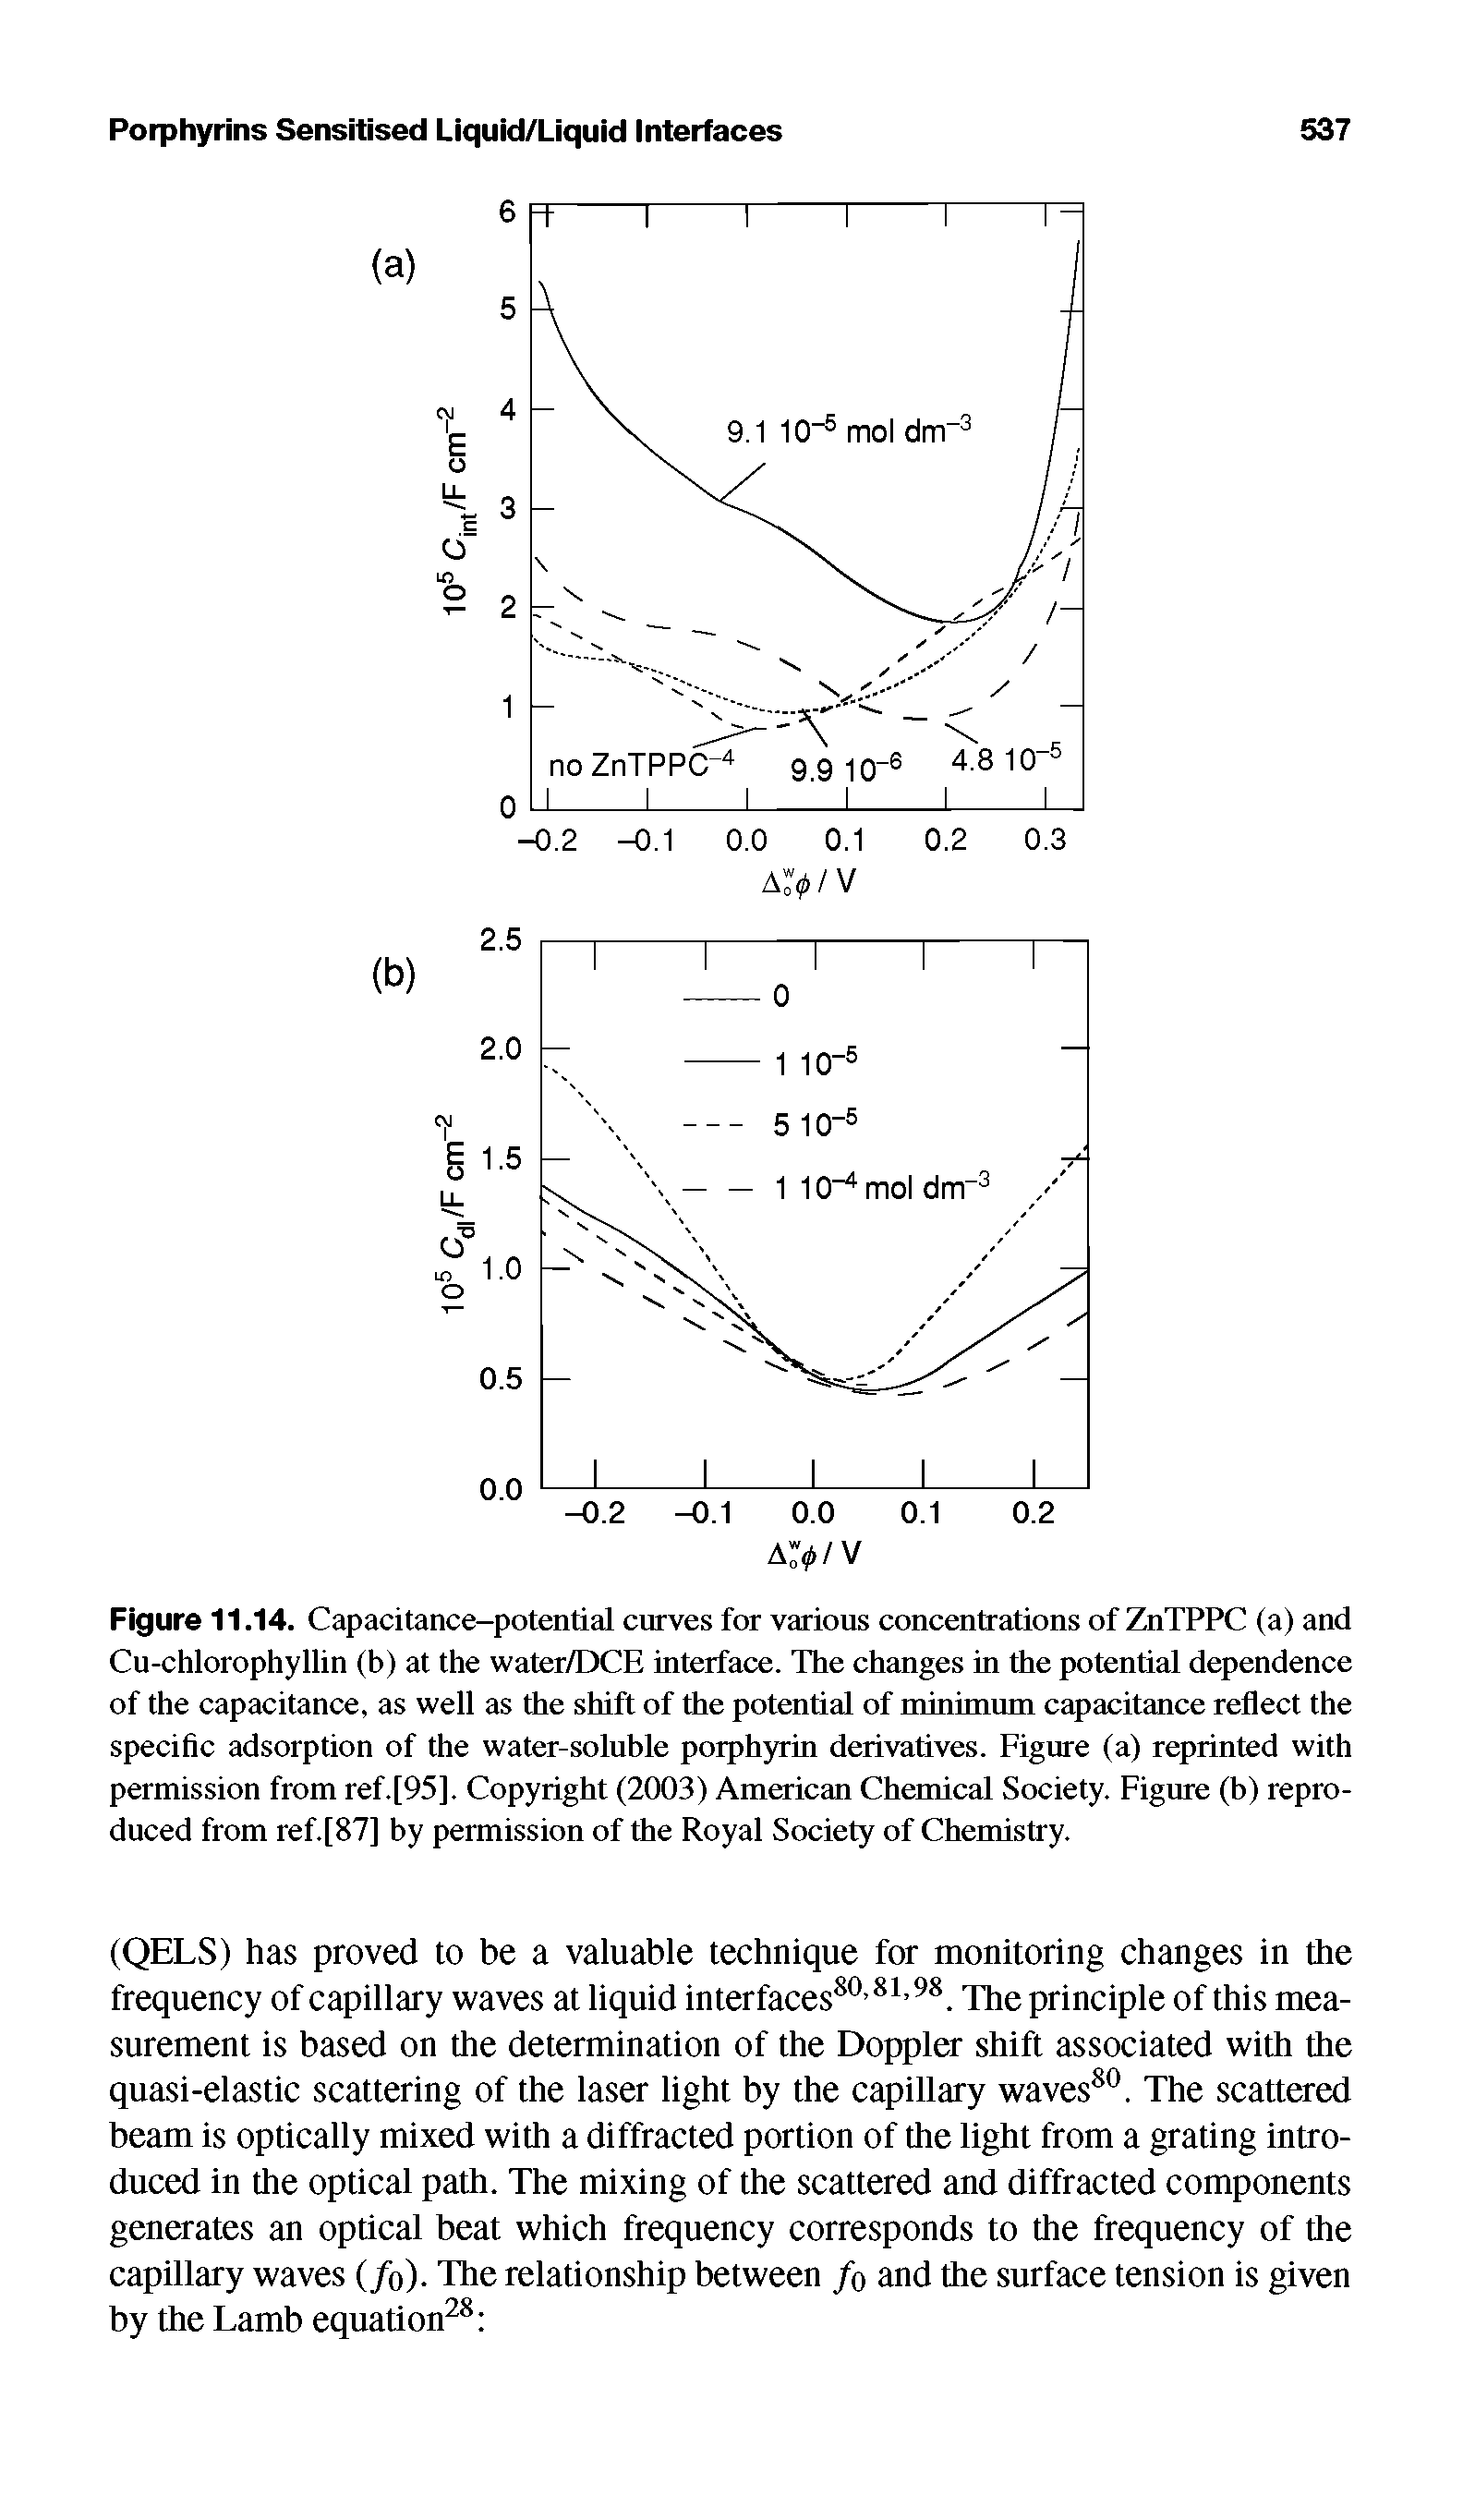 Figure 11.14. Capacitance-potential curves for various concentrations of ZnTPPC (a) and Cu-chlorophyllin (b) at the water/DCE interface. The changes in the potential dependence of the capacitance, as well as the shift of the potential of minimum capacitance reflect the specific adsorption of the water-soluble porphyrin derivatives. Figure (a) reprinted with permission from ref.[95]. Copyright (2003) American Chemical Society. Figure (b) reproduced from ref.[87] by permission of the Royal Society of Chemistry.